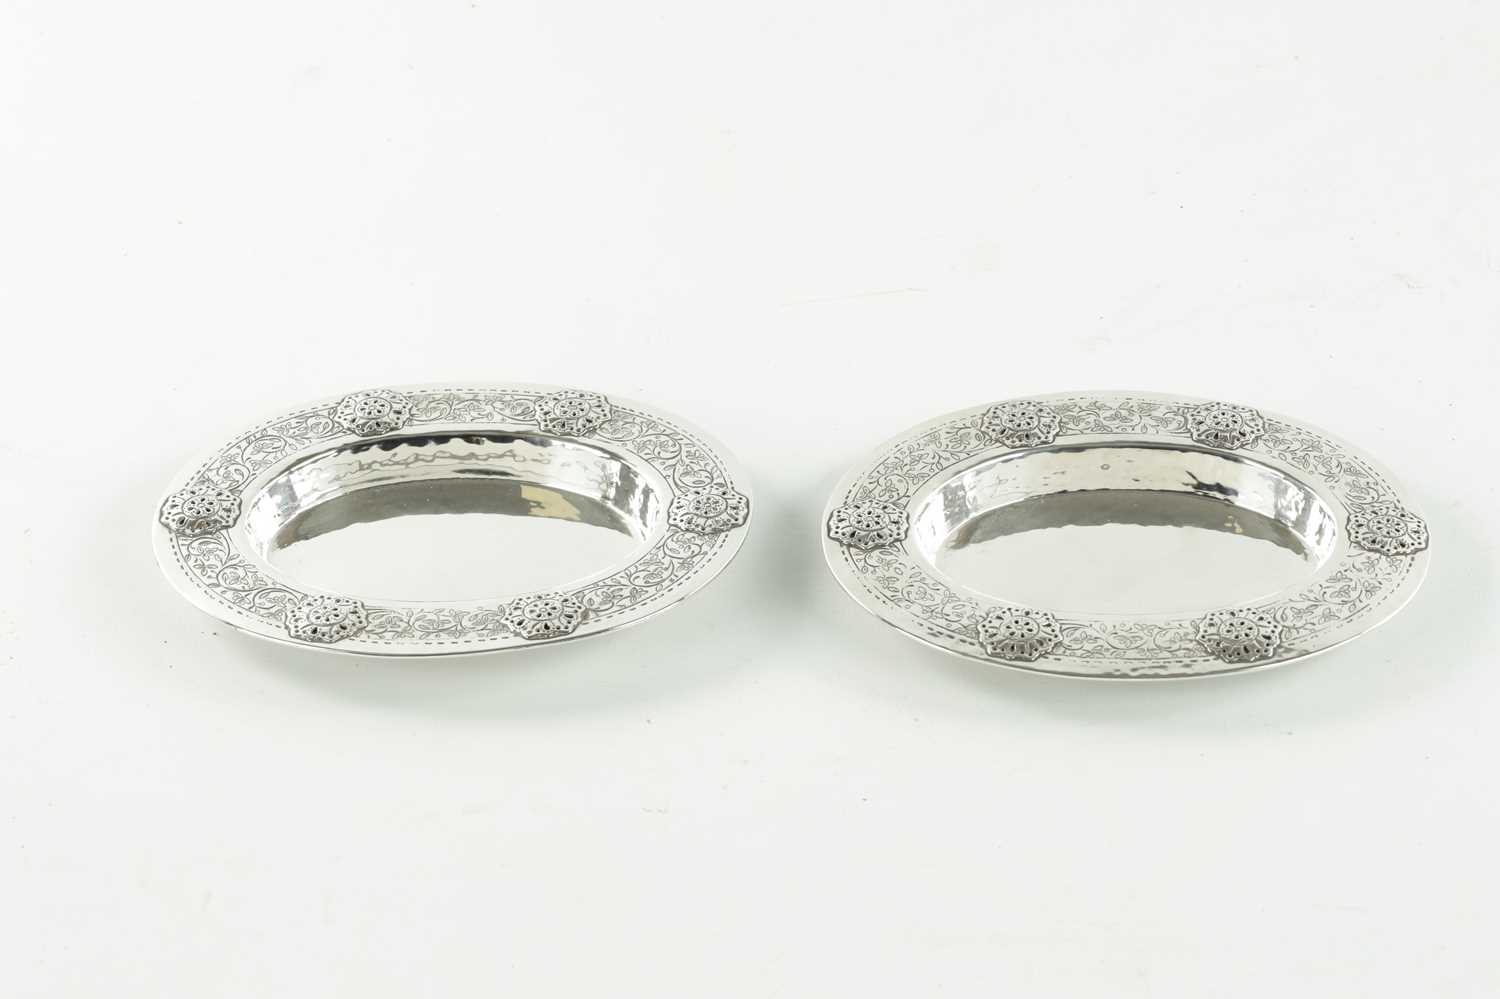 A PAIR OF LIBERTY & CO. ARTS AND CRAFTS SILVER OVAL DISHES DESIGNED BY BERNARD CUZNER - Image 3 of 5